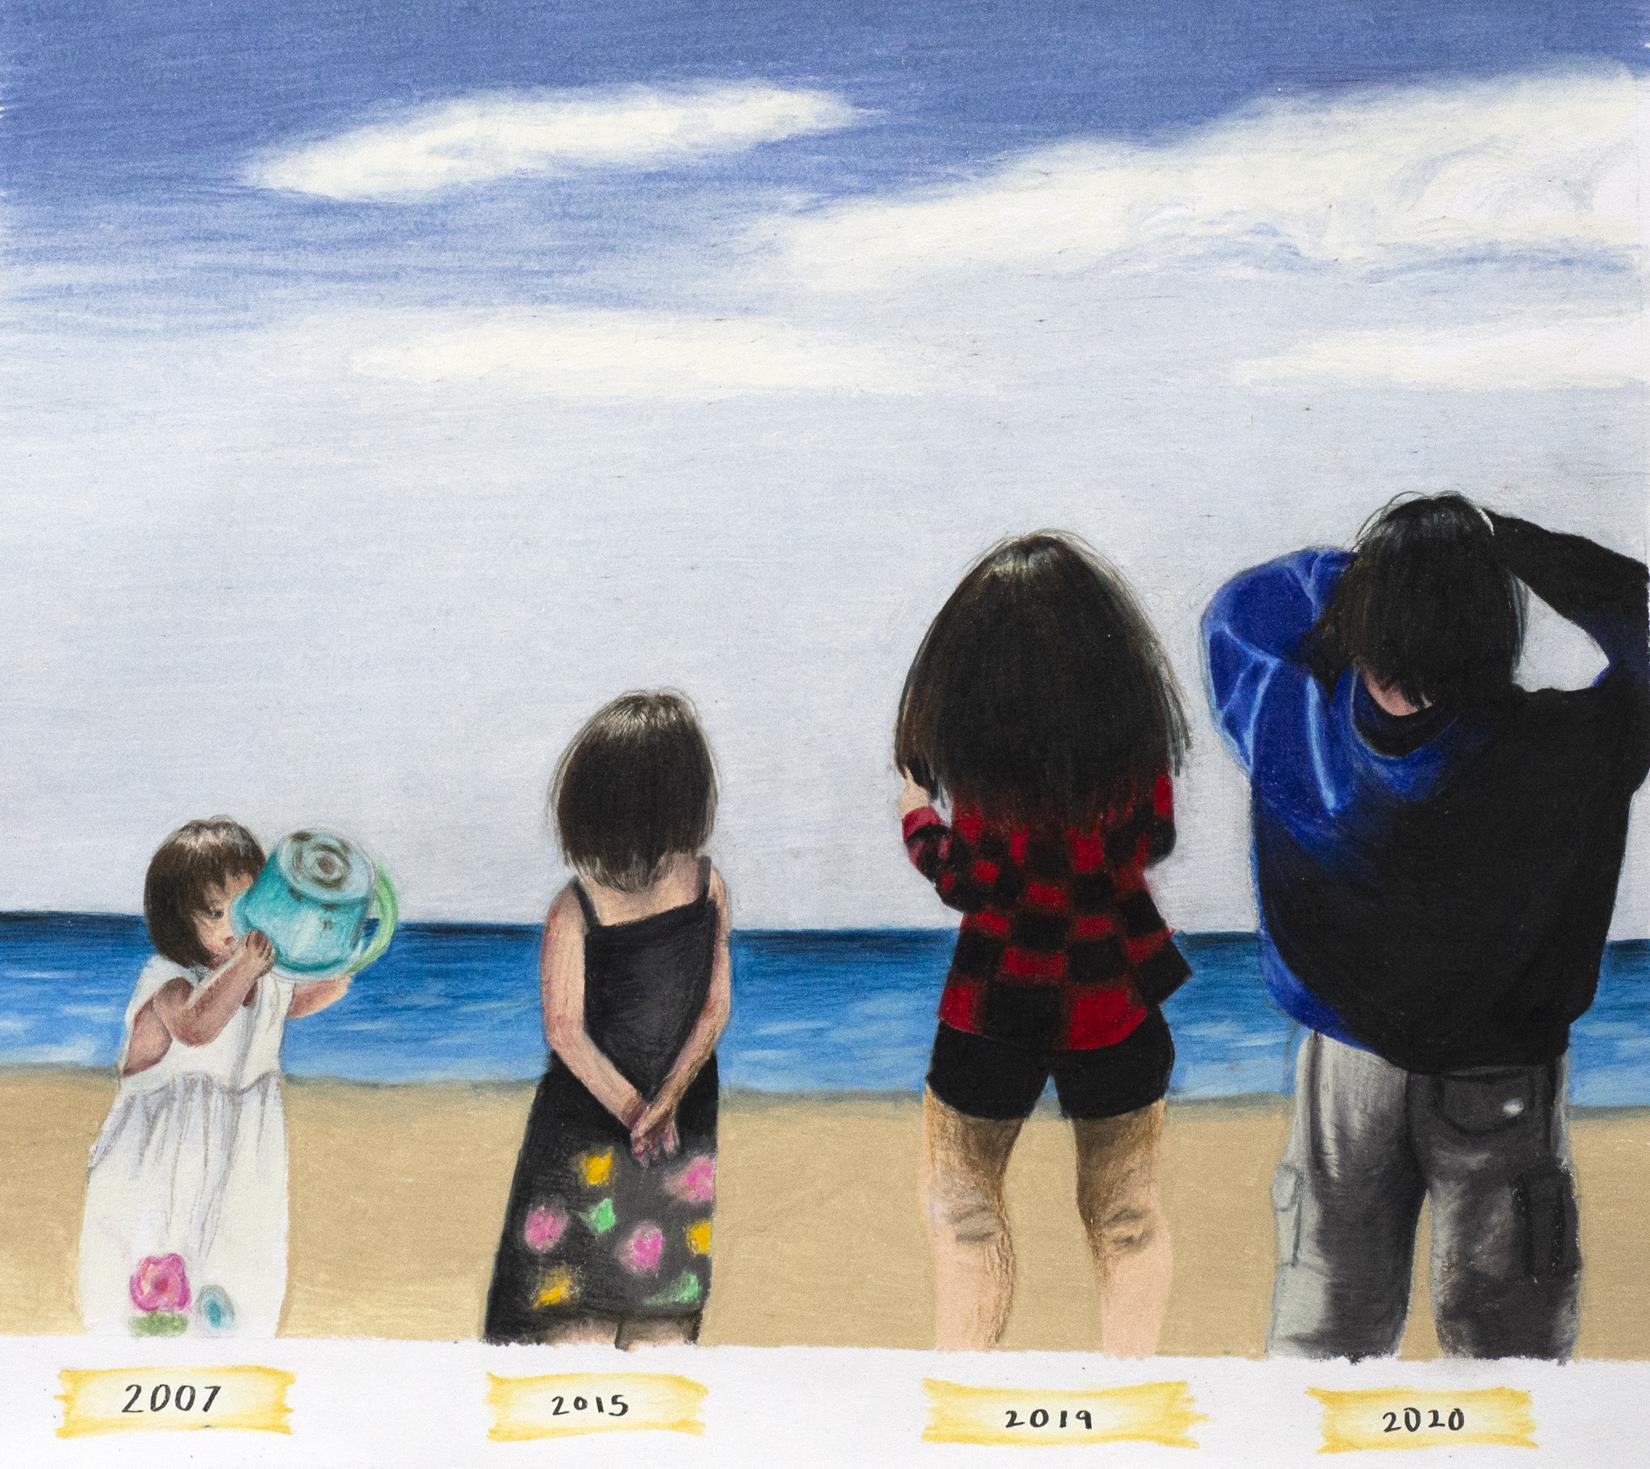 four girls of different ages, all but the youngest seen from the back as they look out at the ocean. The youngest faces the viewer as she empties a sand bucket. below each girl is a label of the years 2007, 2015, 2019, 2020, telling us that these are all the same girl